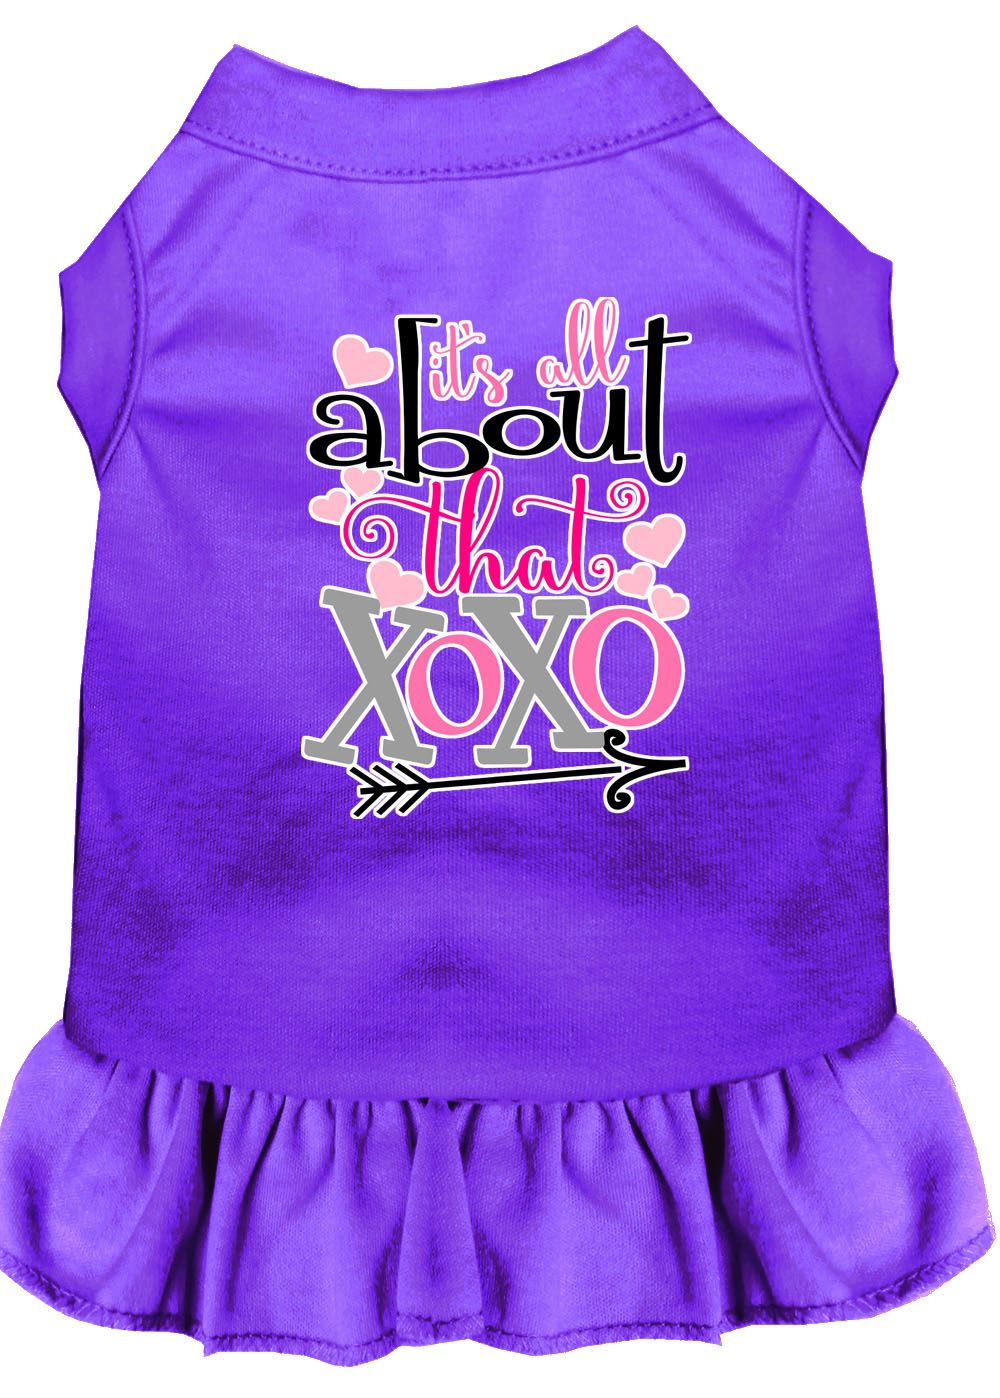 All about the XOXO Screen Print Dog Dress Purple 4X